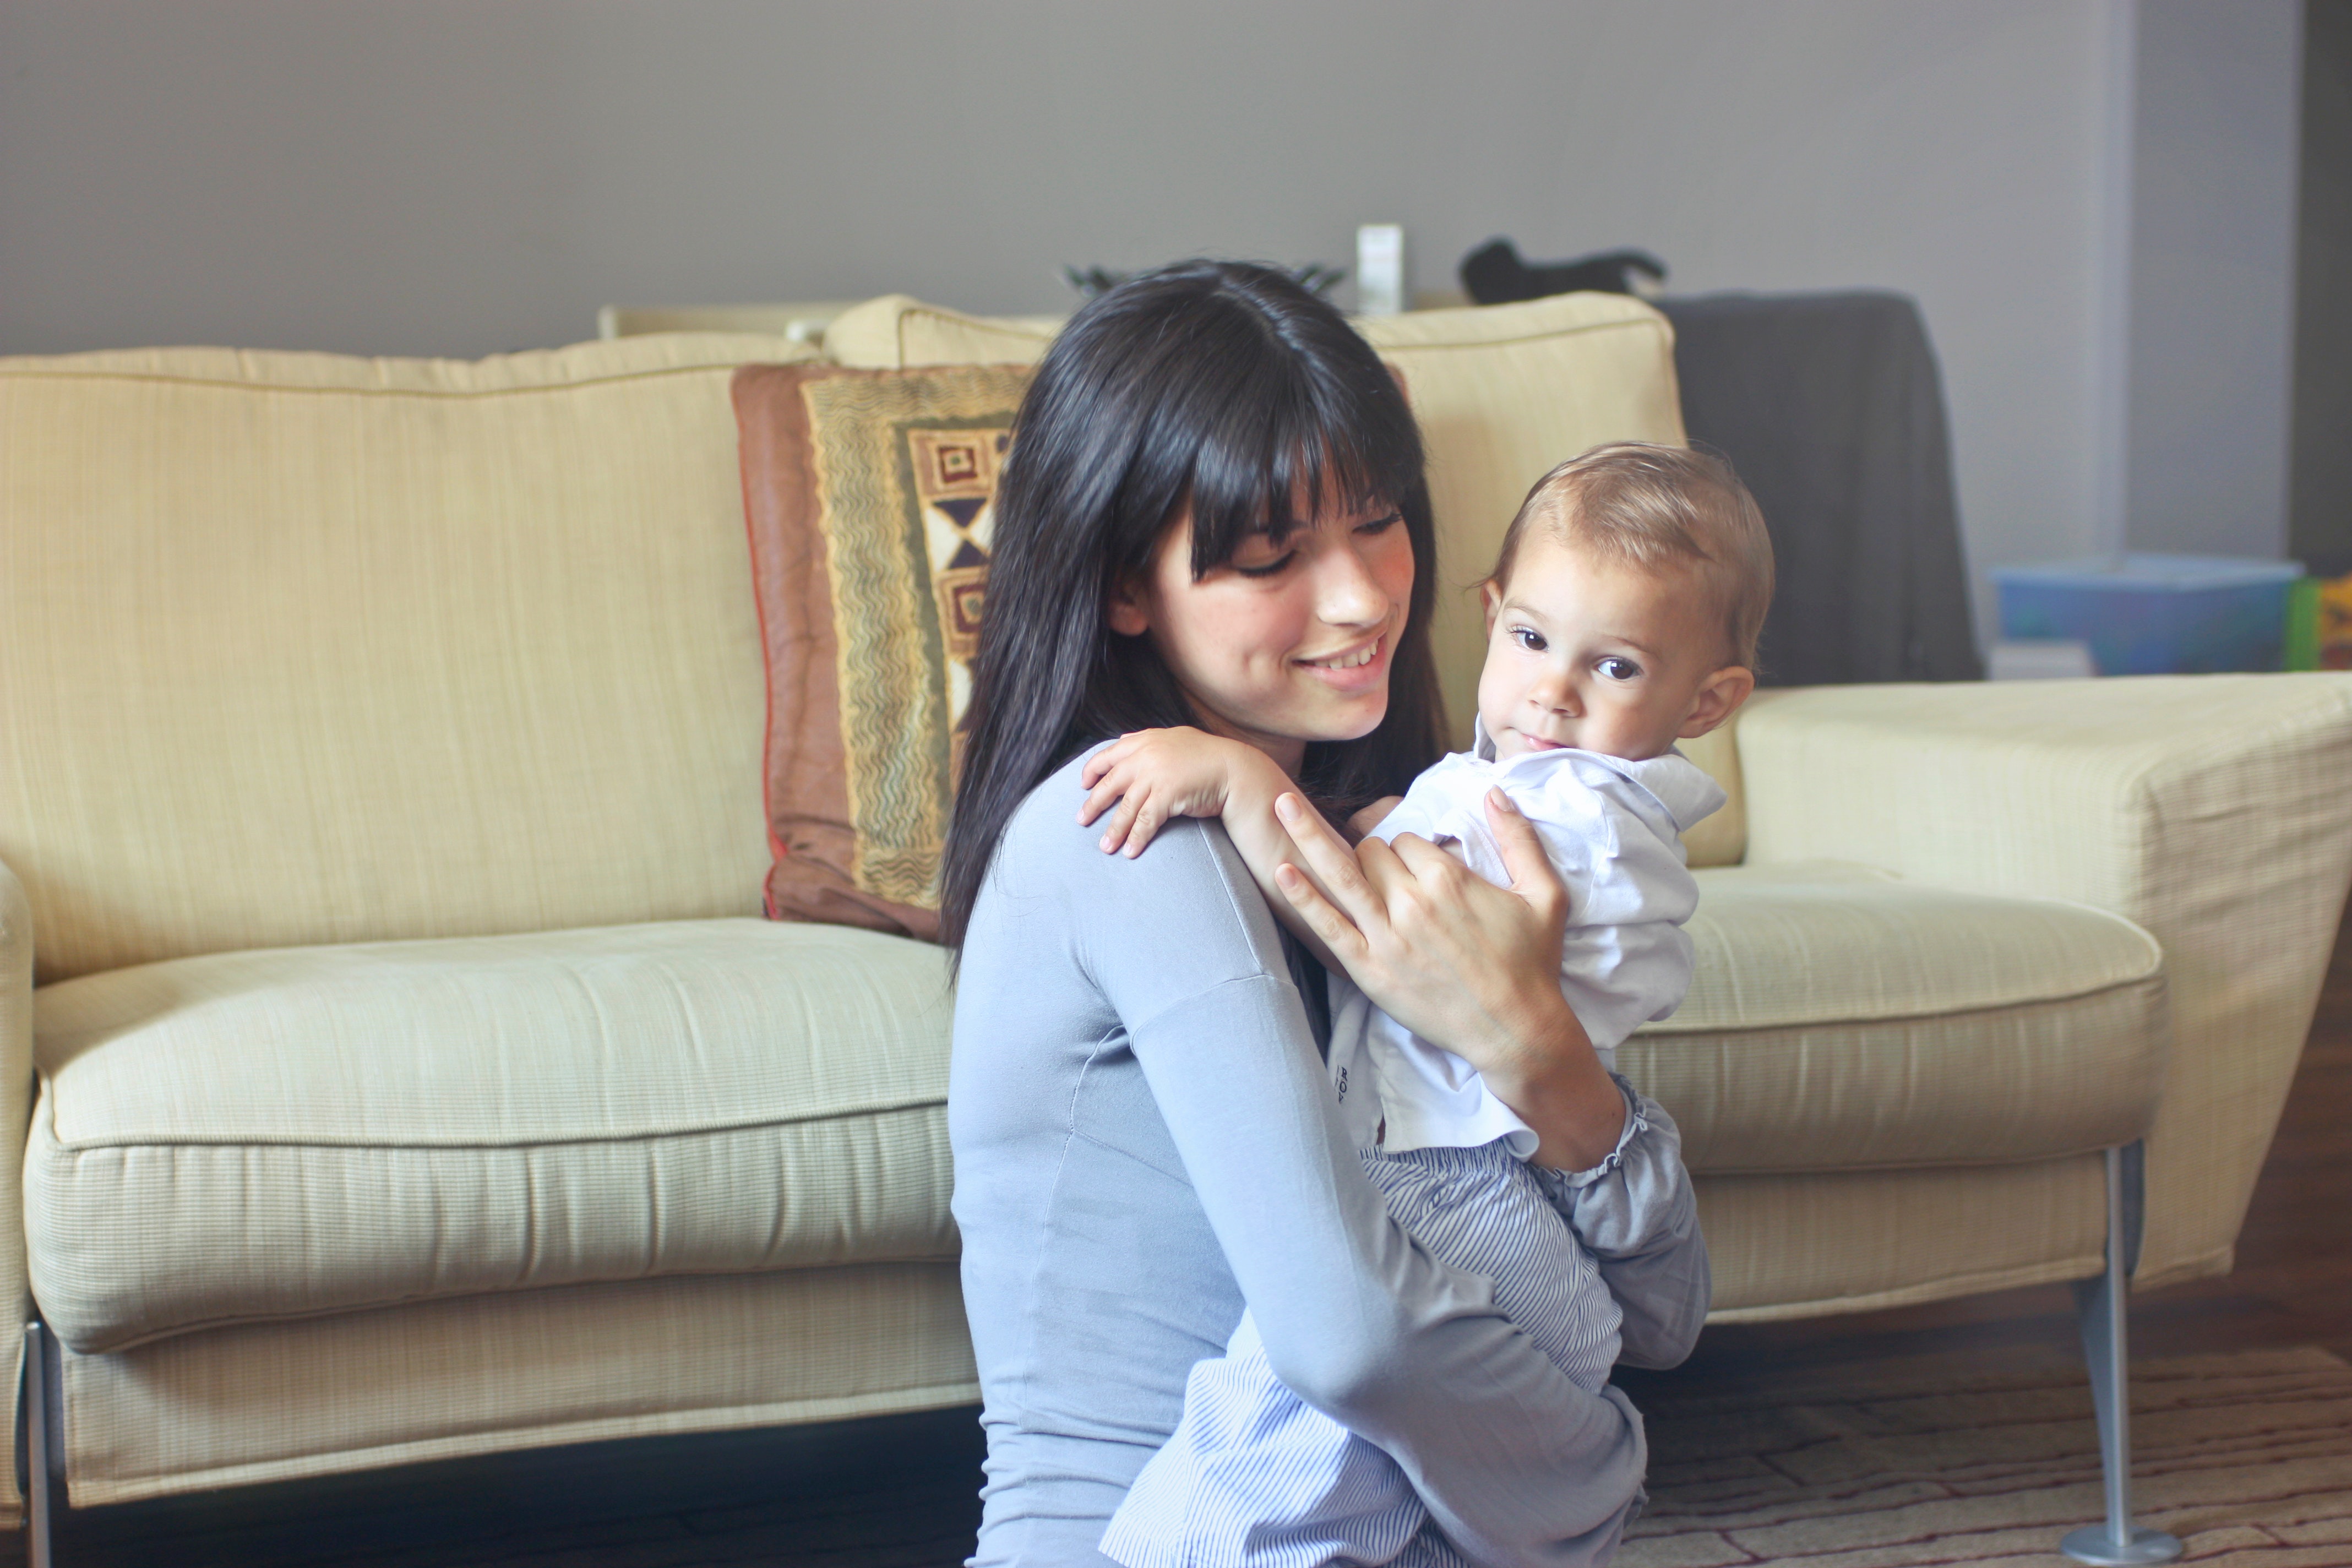 Woman in Gray Sweater Carrying Toddler in White Button-up Shirt, Adult, Room, Mom, Mommy, HQ Photo